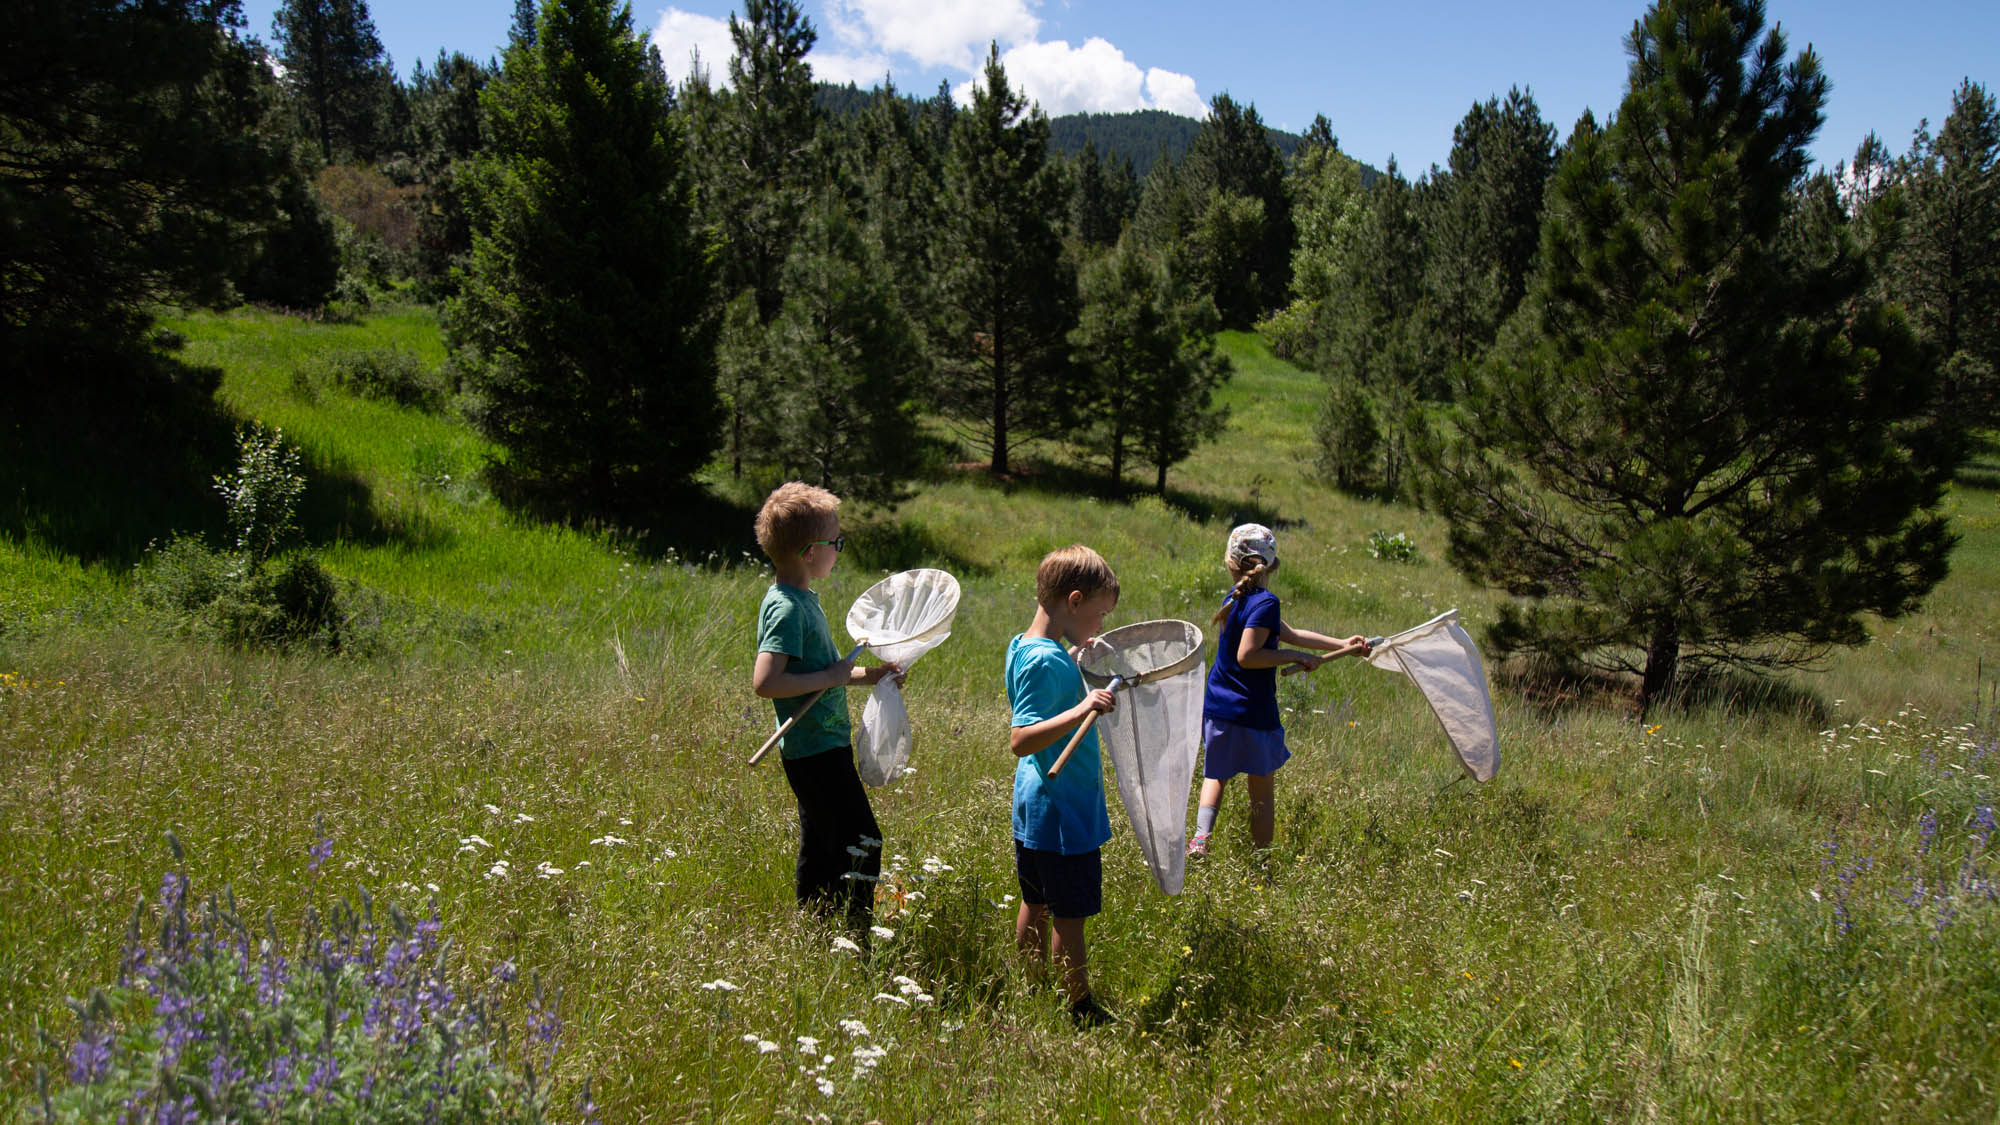 Photo of children in a mountain meadow with butterfly nets catching insects.